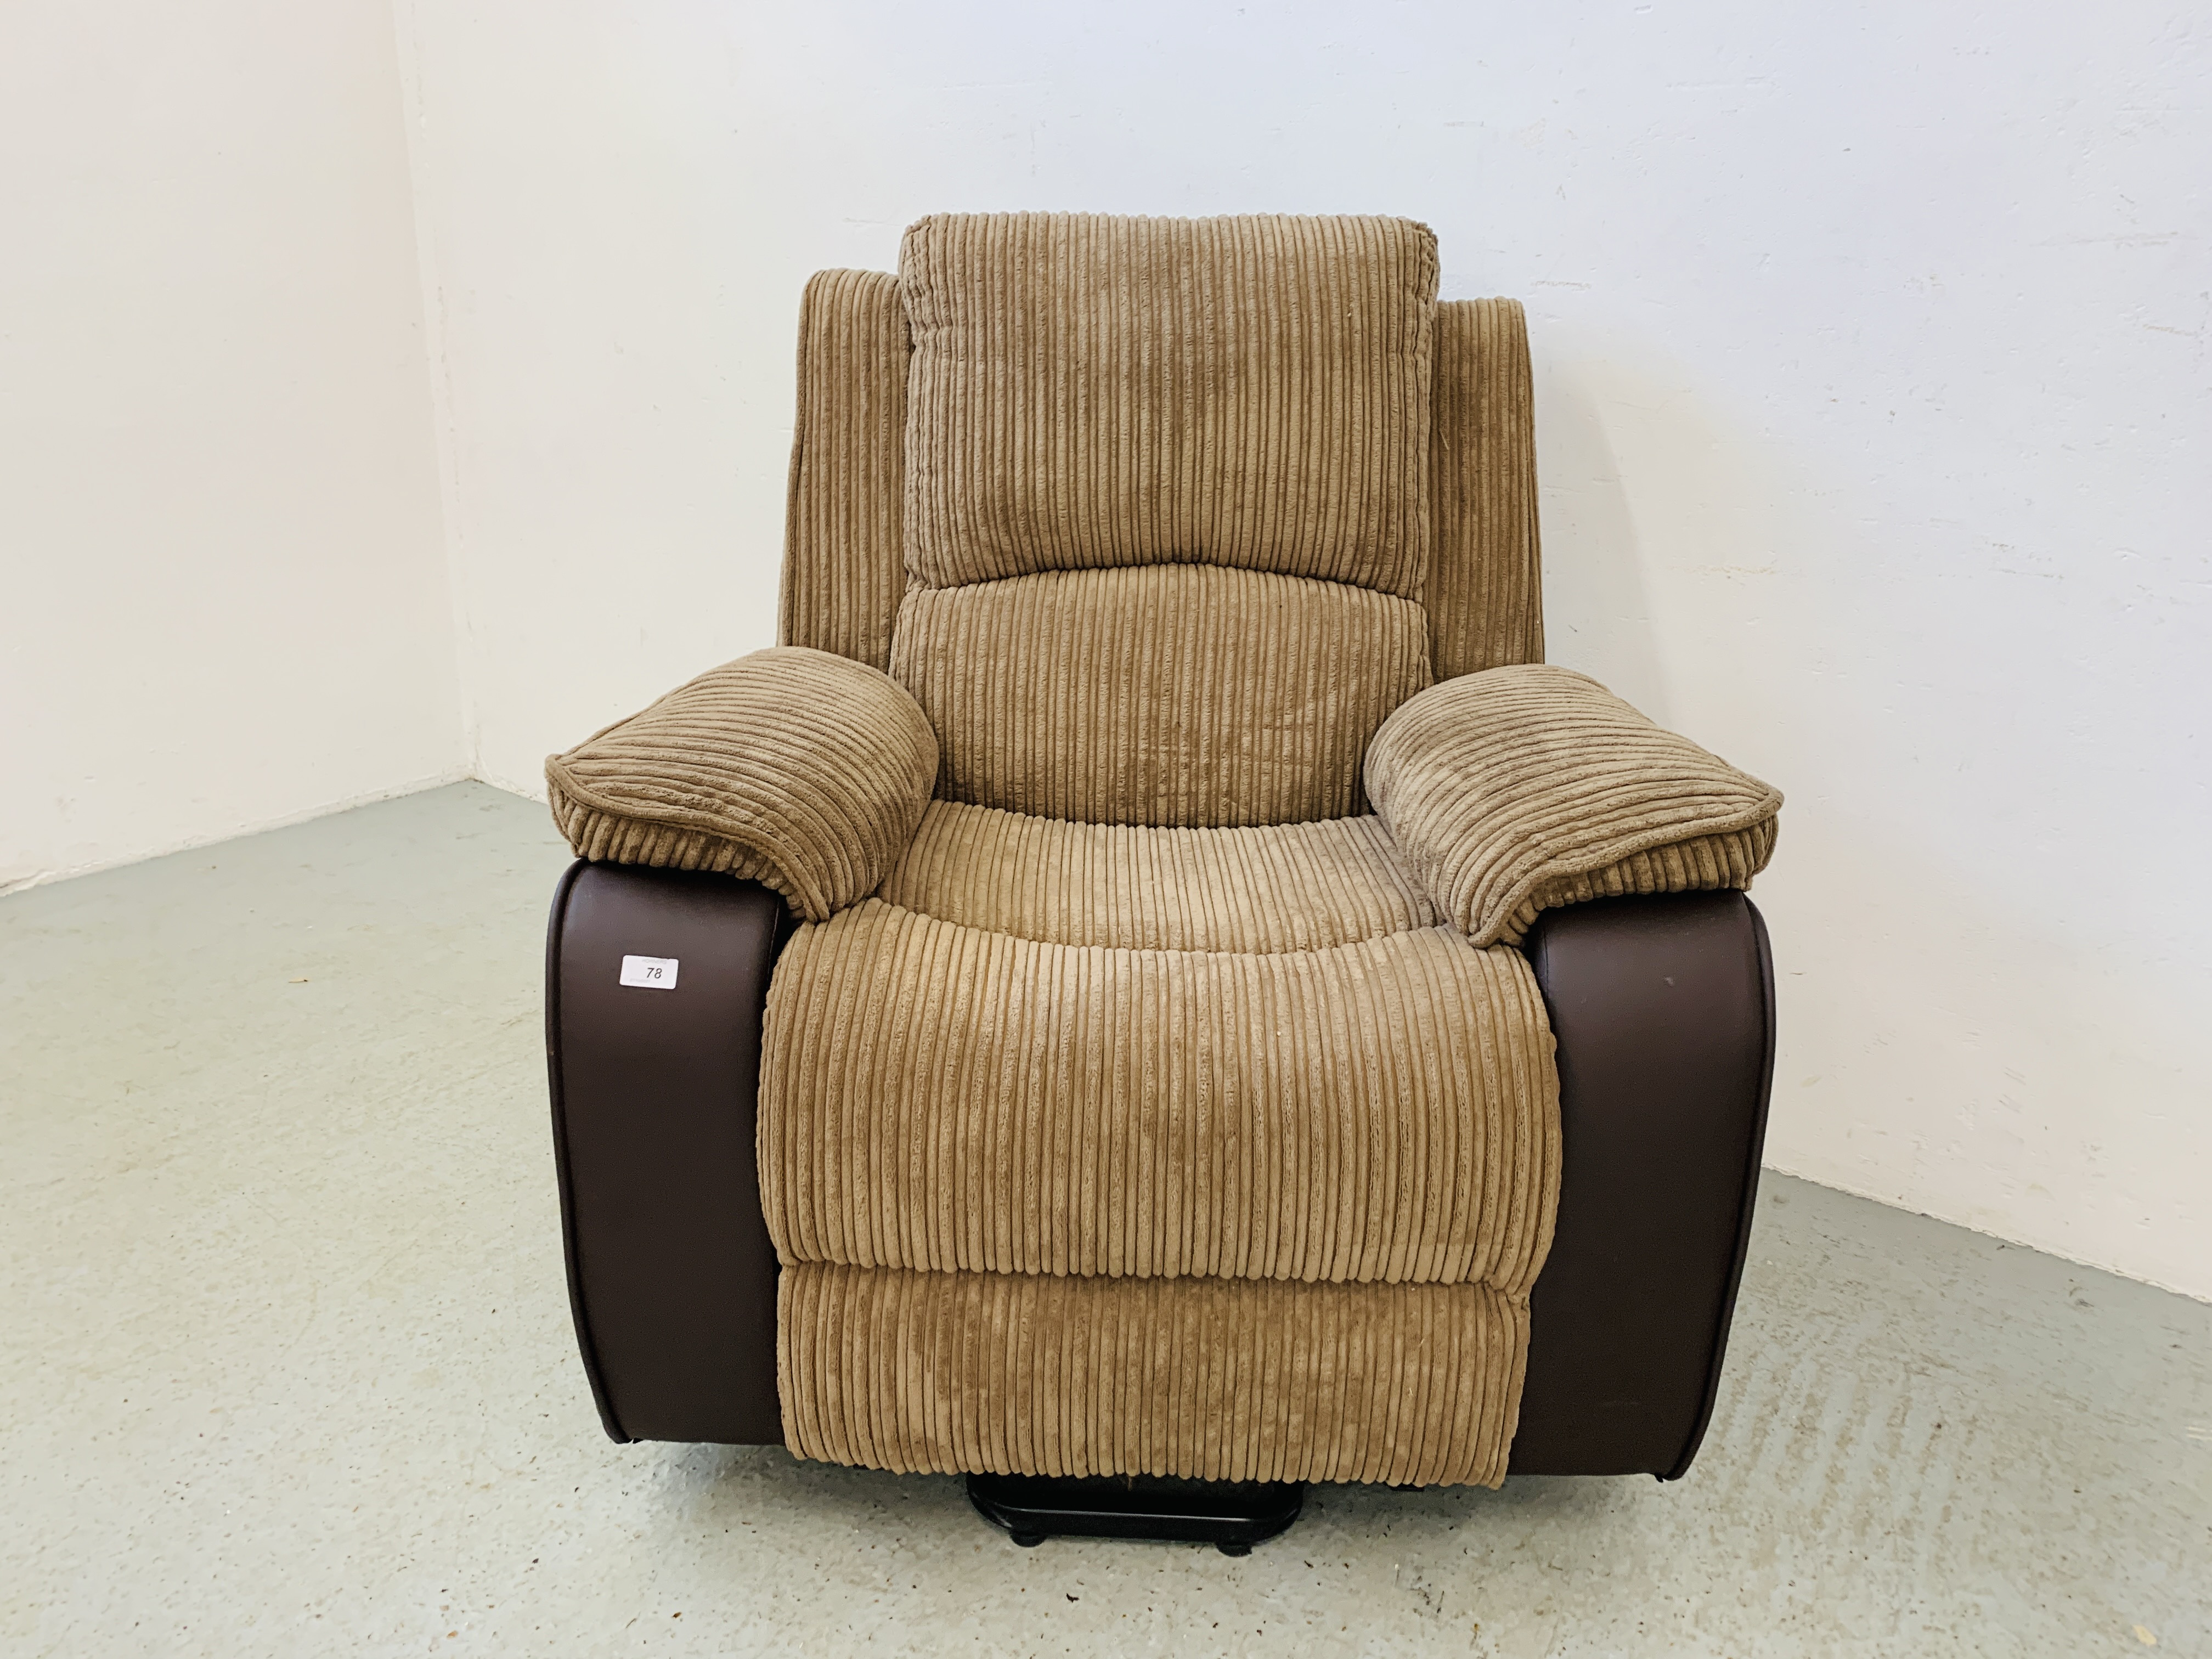 A MODERN ELECTRIC RECLINING EASY CHAIR WITH BROWN FAUX LEATHER AND BROWN CORDED UPHOLSTERY - SOLD - Image 2 of 6